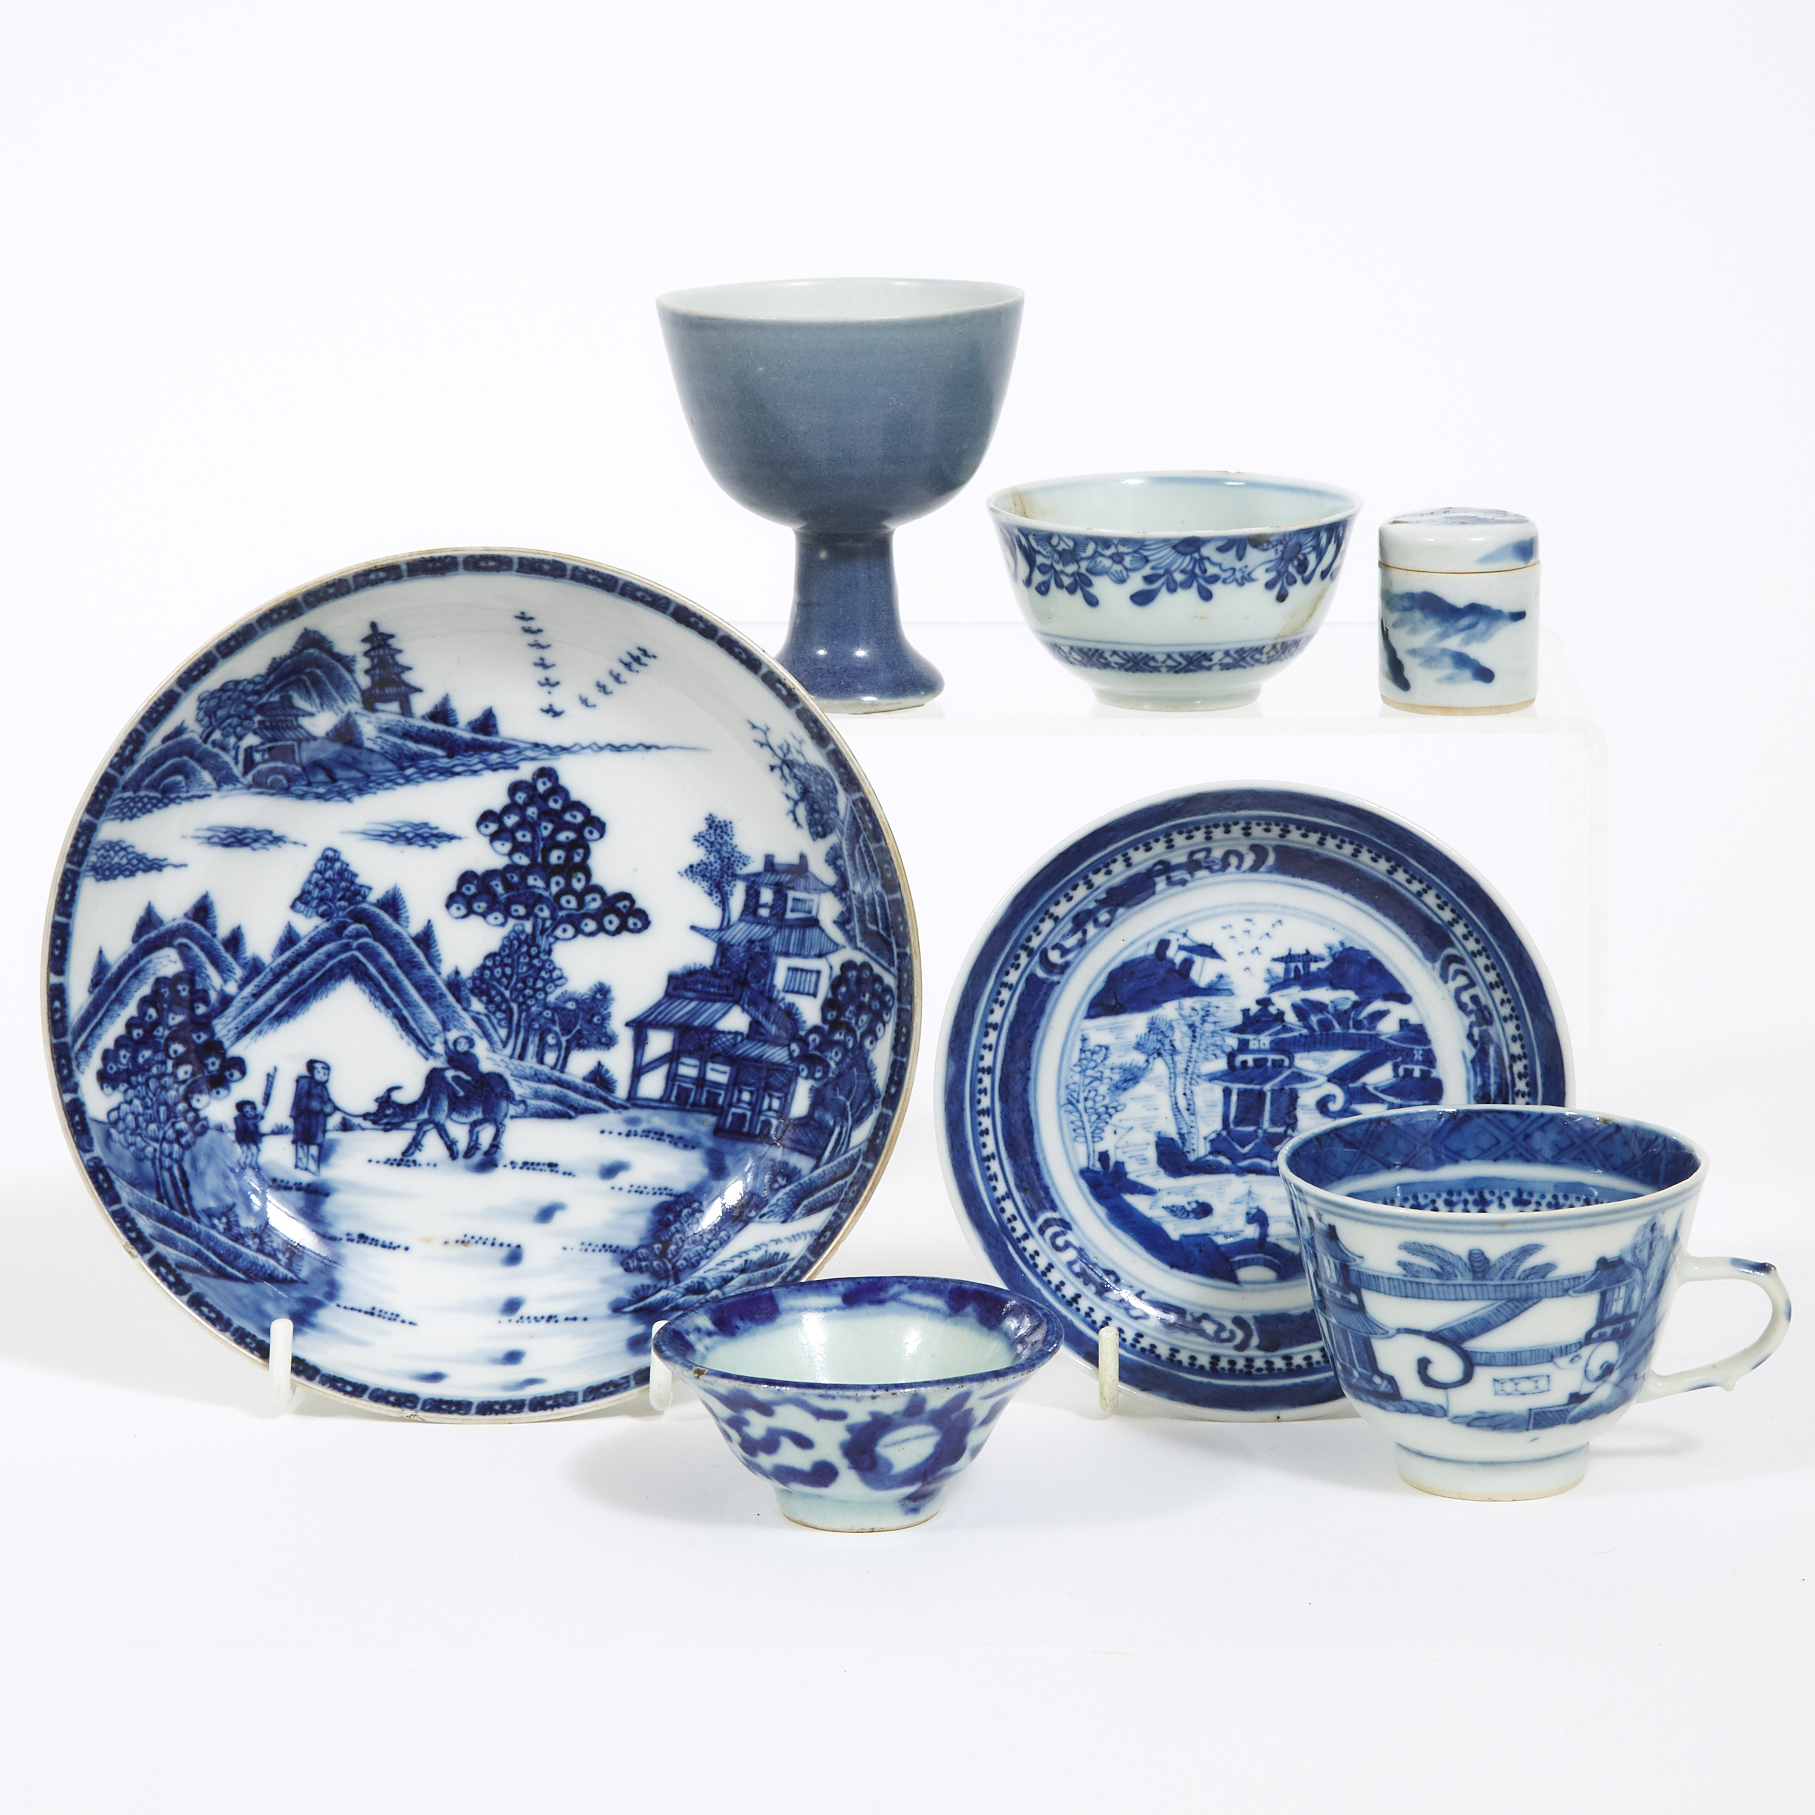 A Group of Seven Blue and White Porcelain Wares, 17th/18th Century